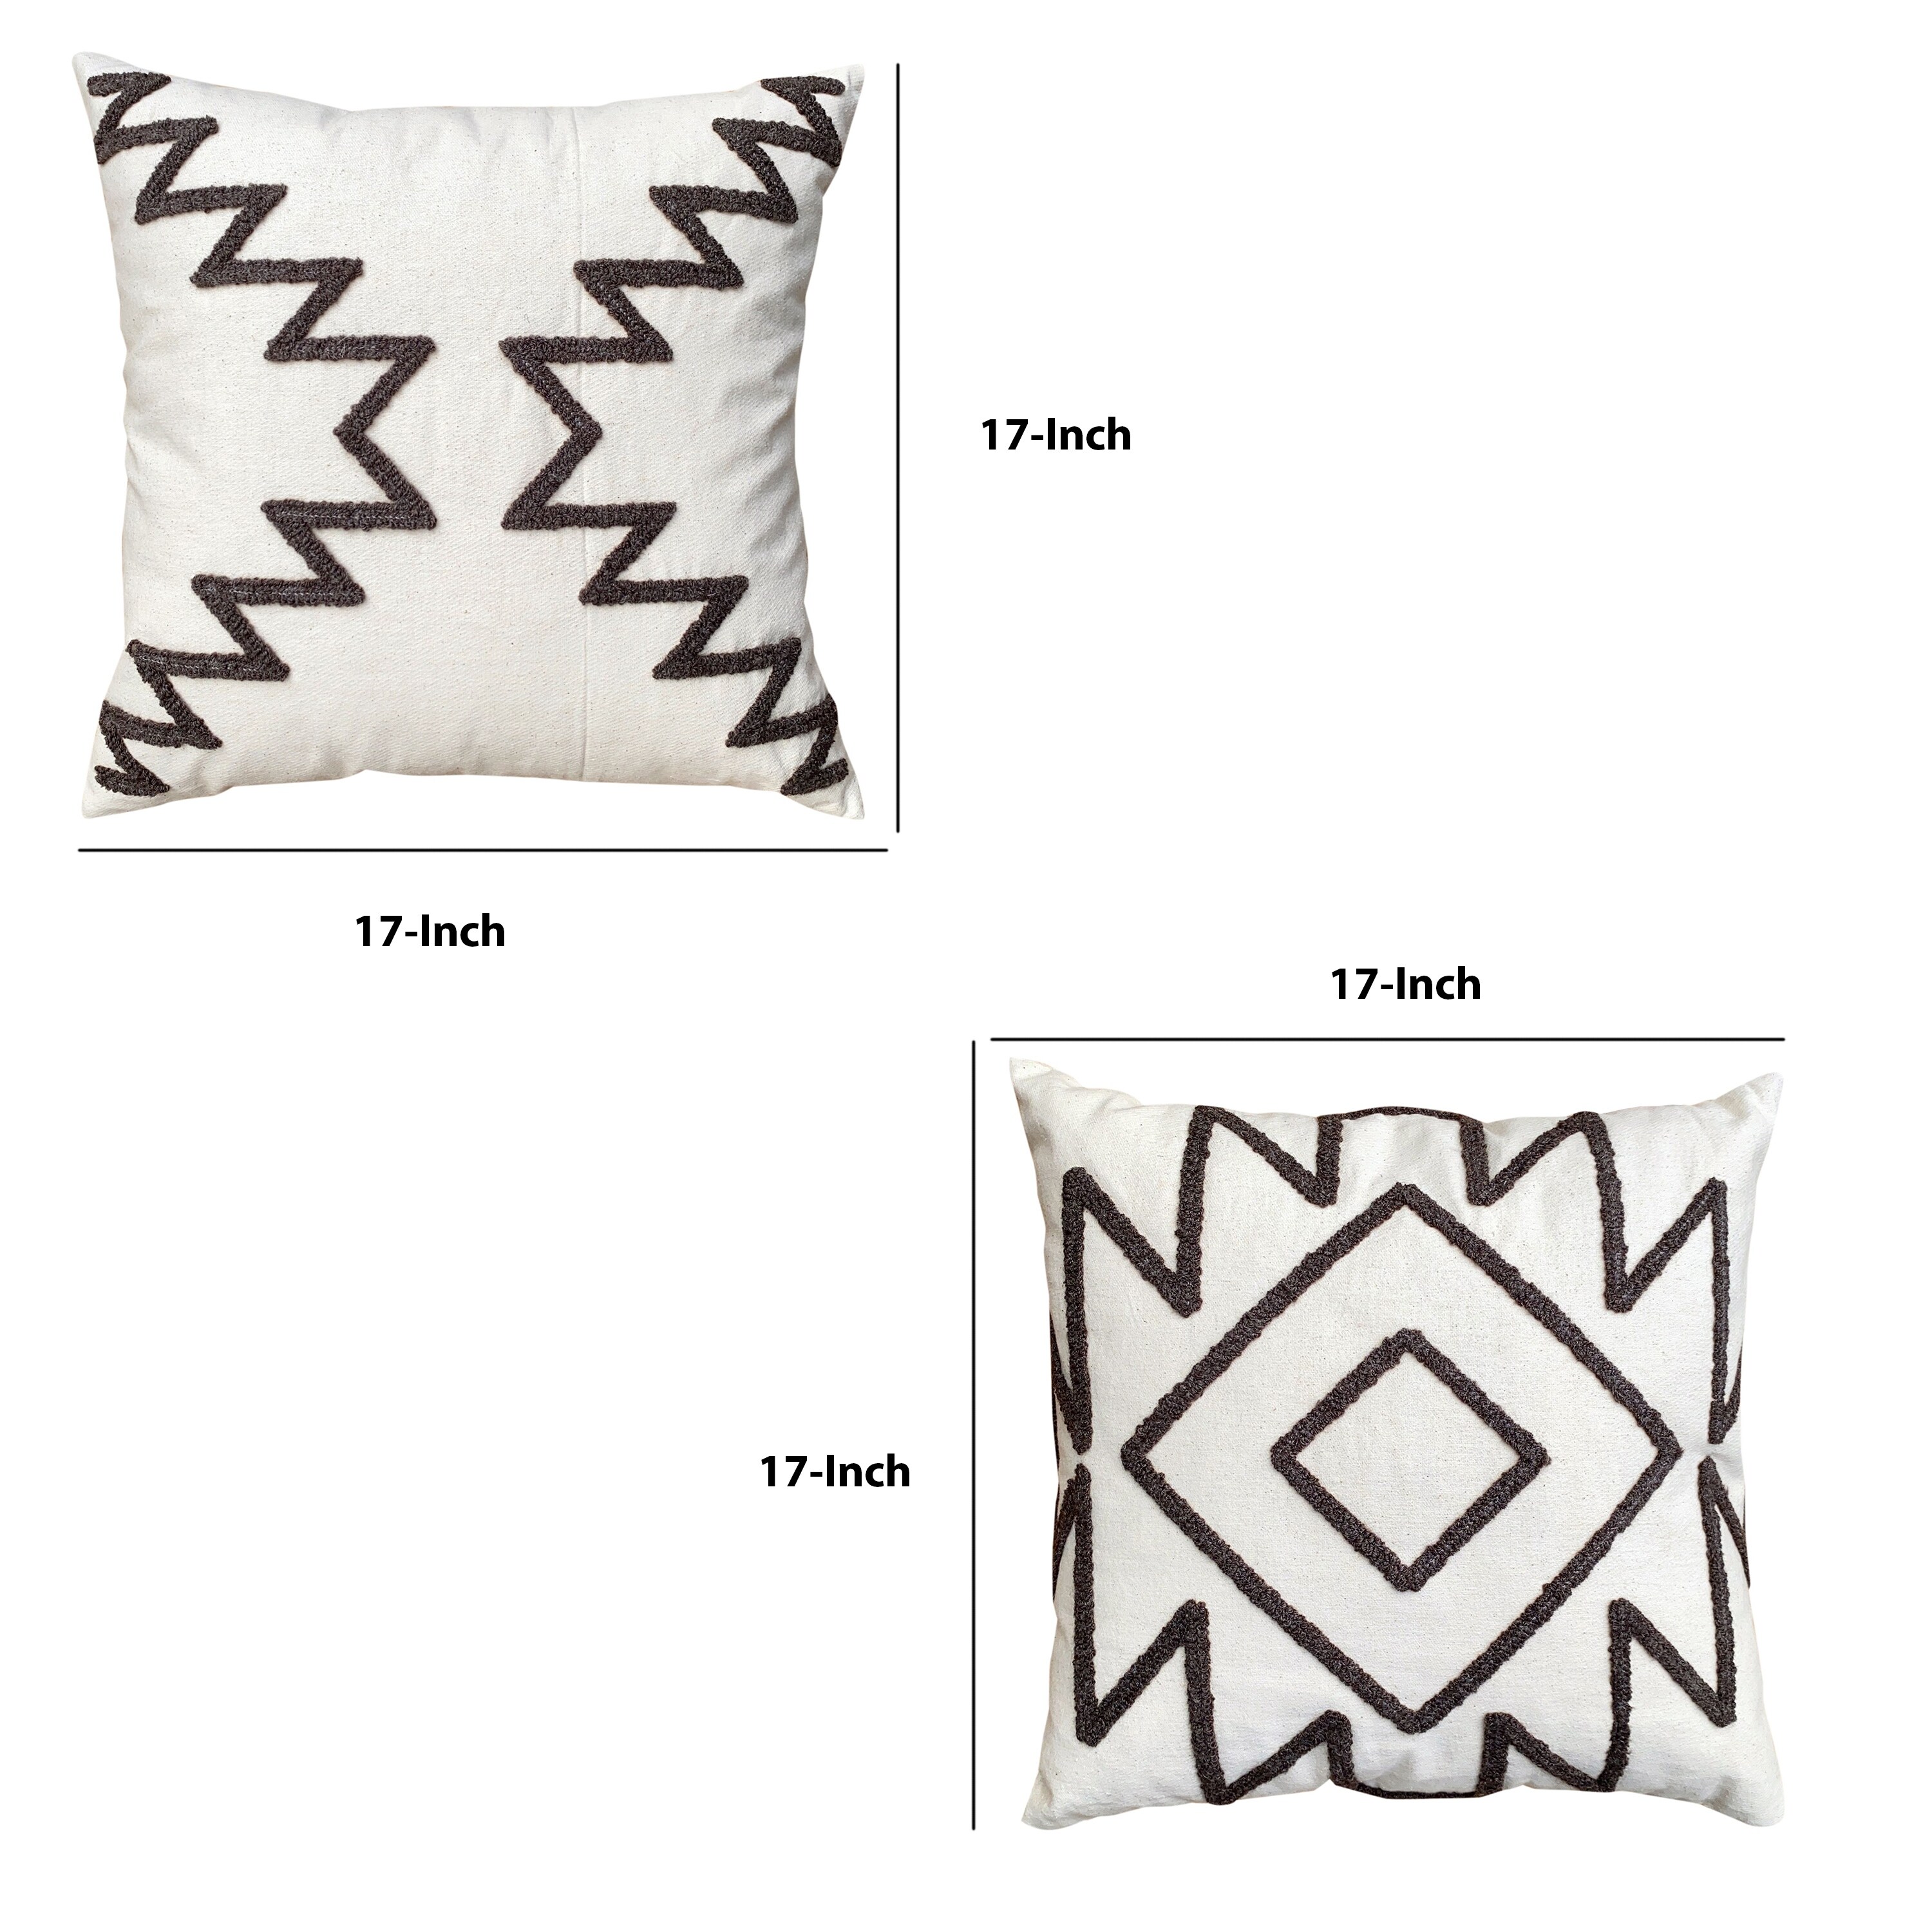 17 x 17 Inch 2 Piece Square Cotton Accent Throw Pillow Set with Modern Geometric Aztec Design Hand Embroidery - White